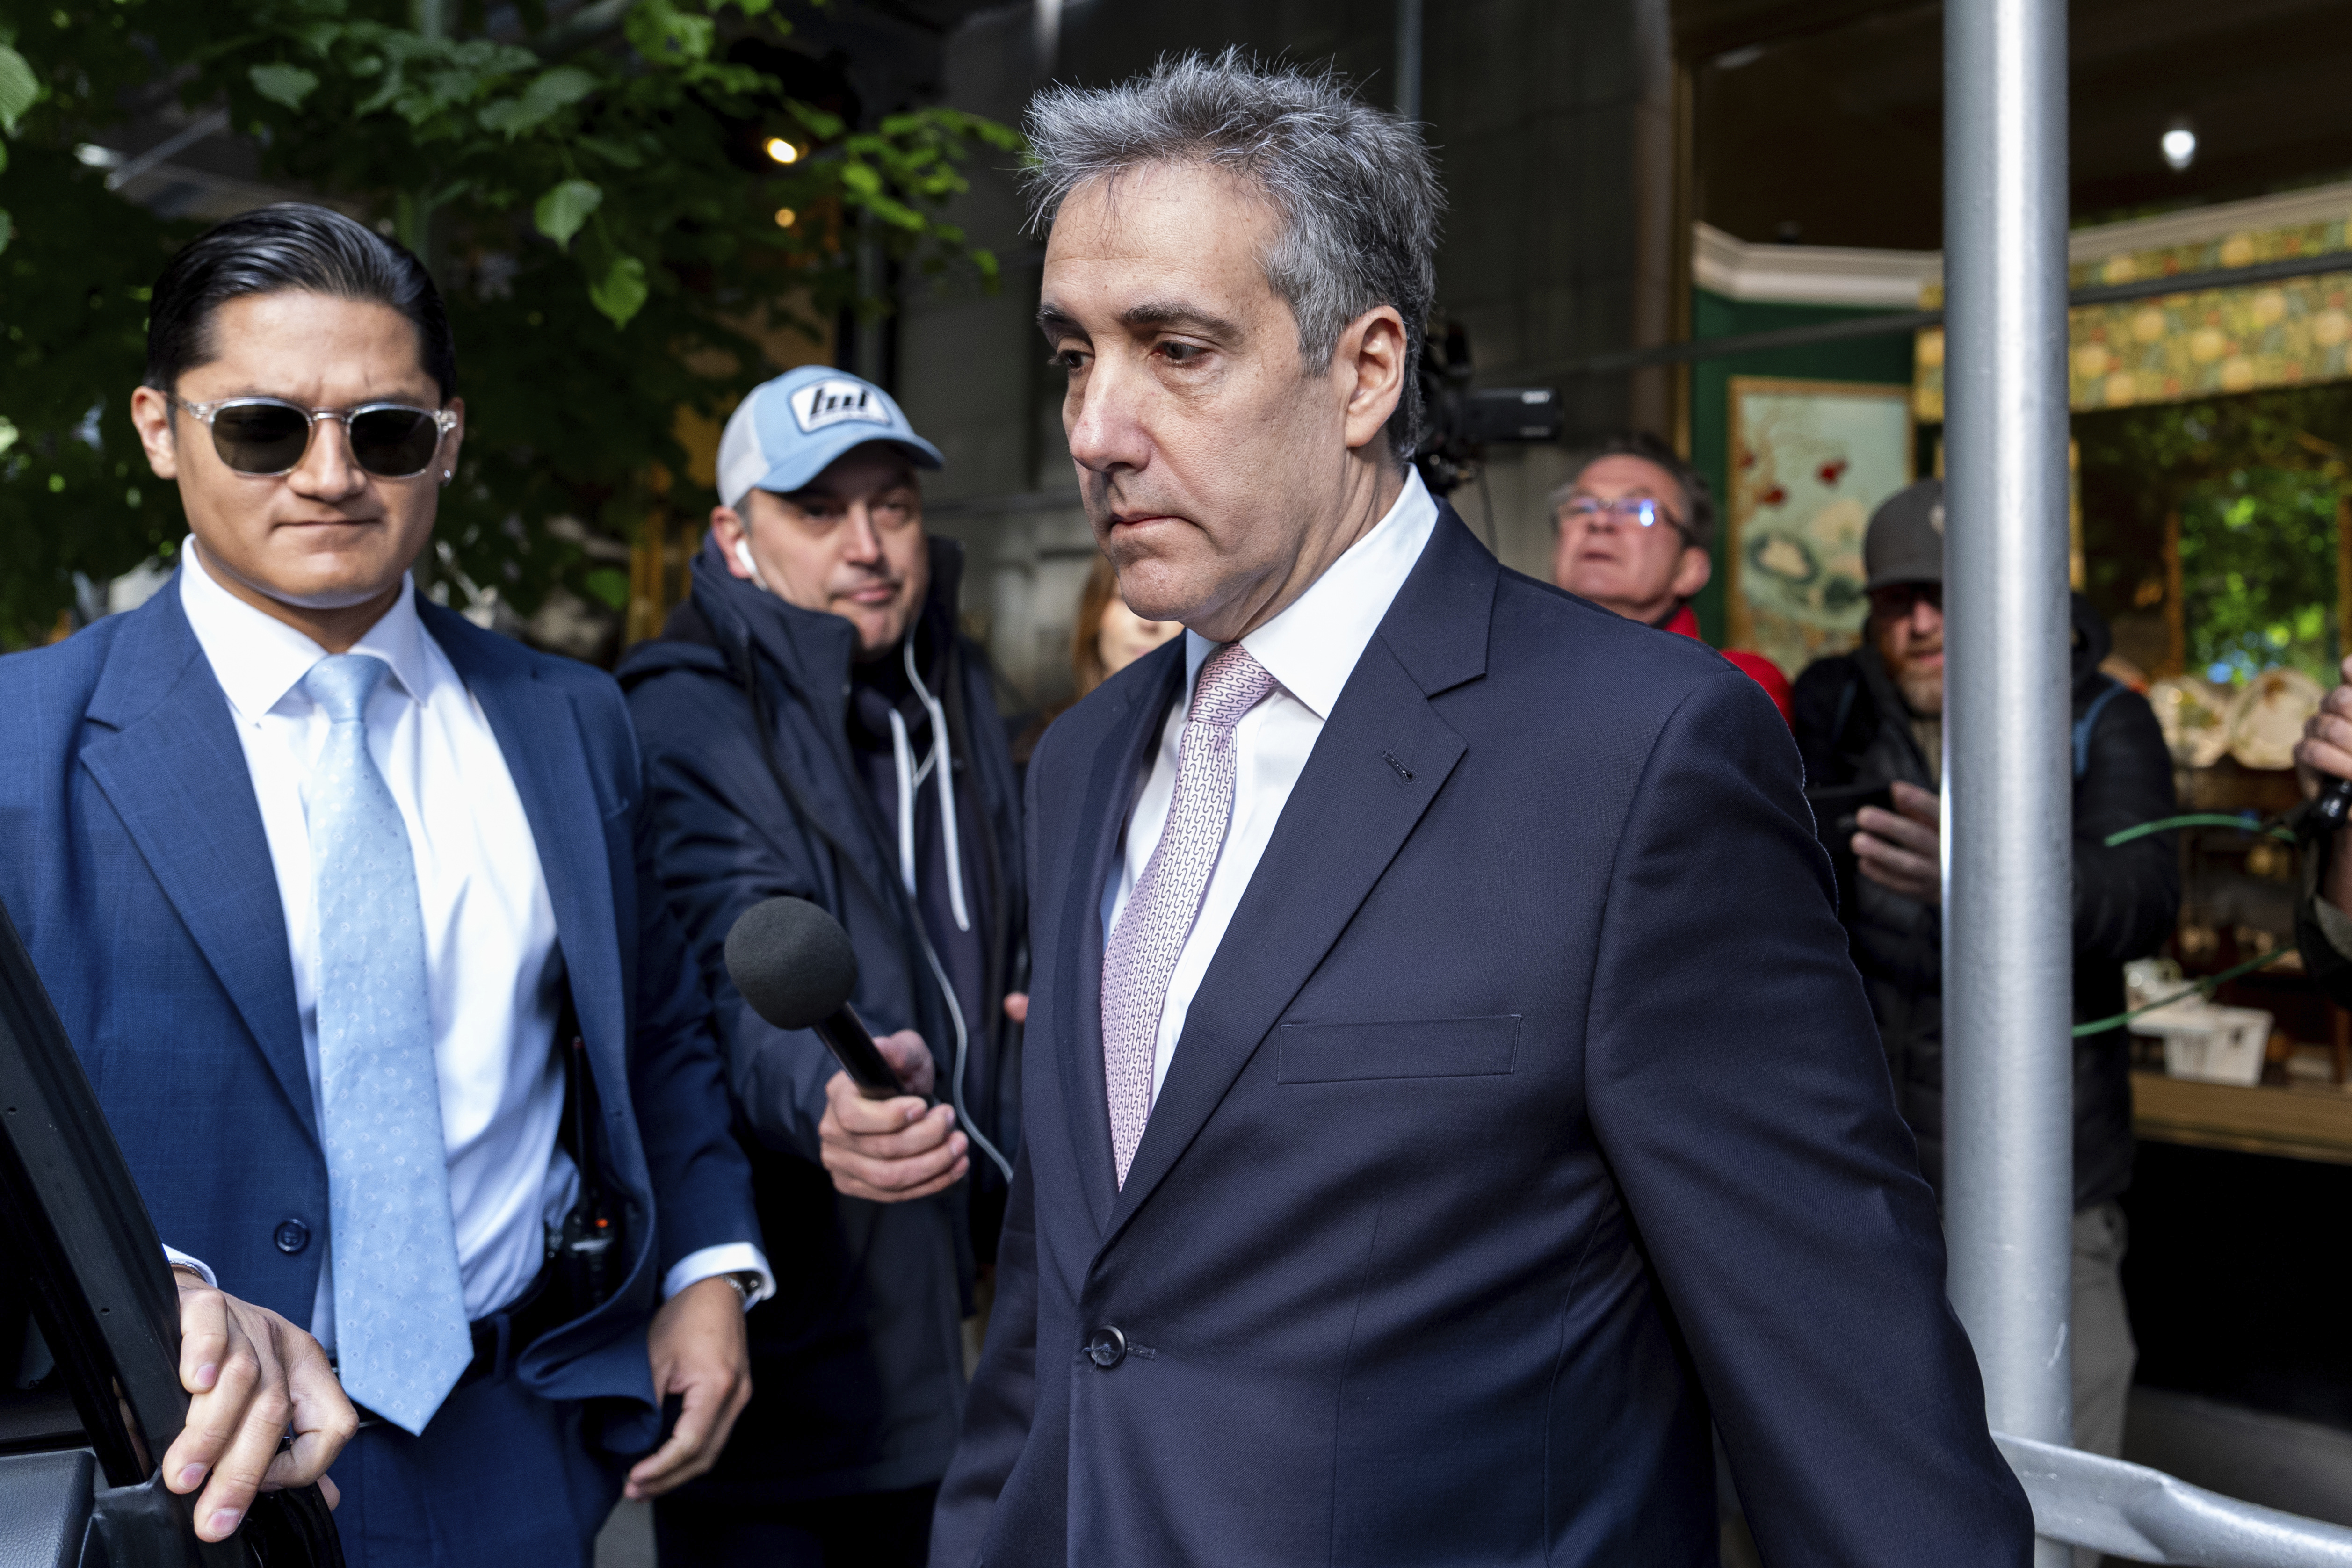 FILE - Michael Cohen leaves his apartment building on his way to Manhattan criminal court, May 13, 2024, in New York. Donald Trump's hush money trial is heading into the final stretch. The landmark trial will kick back off Monday, May 20, in Manhattan with more defense cross-examination of former Trump attorney Cohen. Cohen's pivotal testimony directly tied Trump to the alleged hush money scheme. Defense lawyers are trying to paint Cohen as a serial fabulist who is on a revenge campaign against the presumptive Republican presidential nominee. (AP Photo/Julia Nikhinson, File)